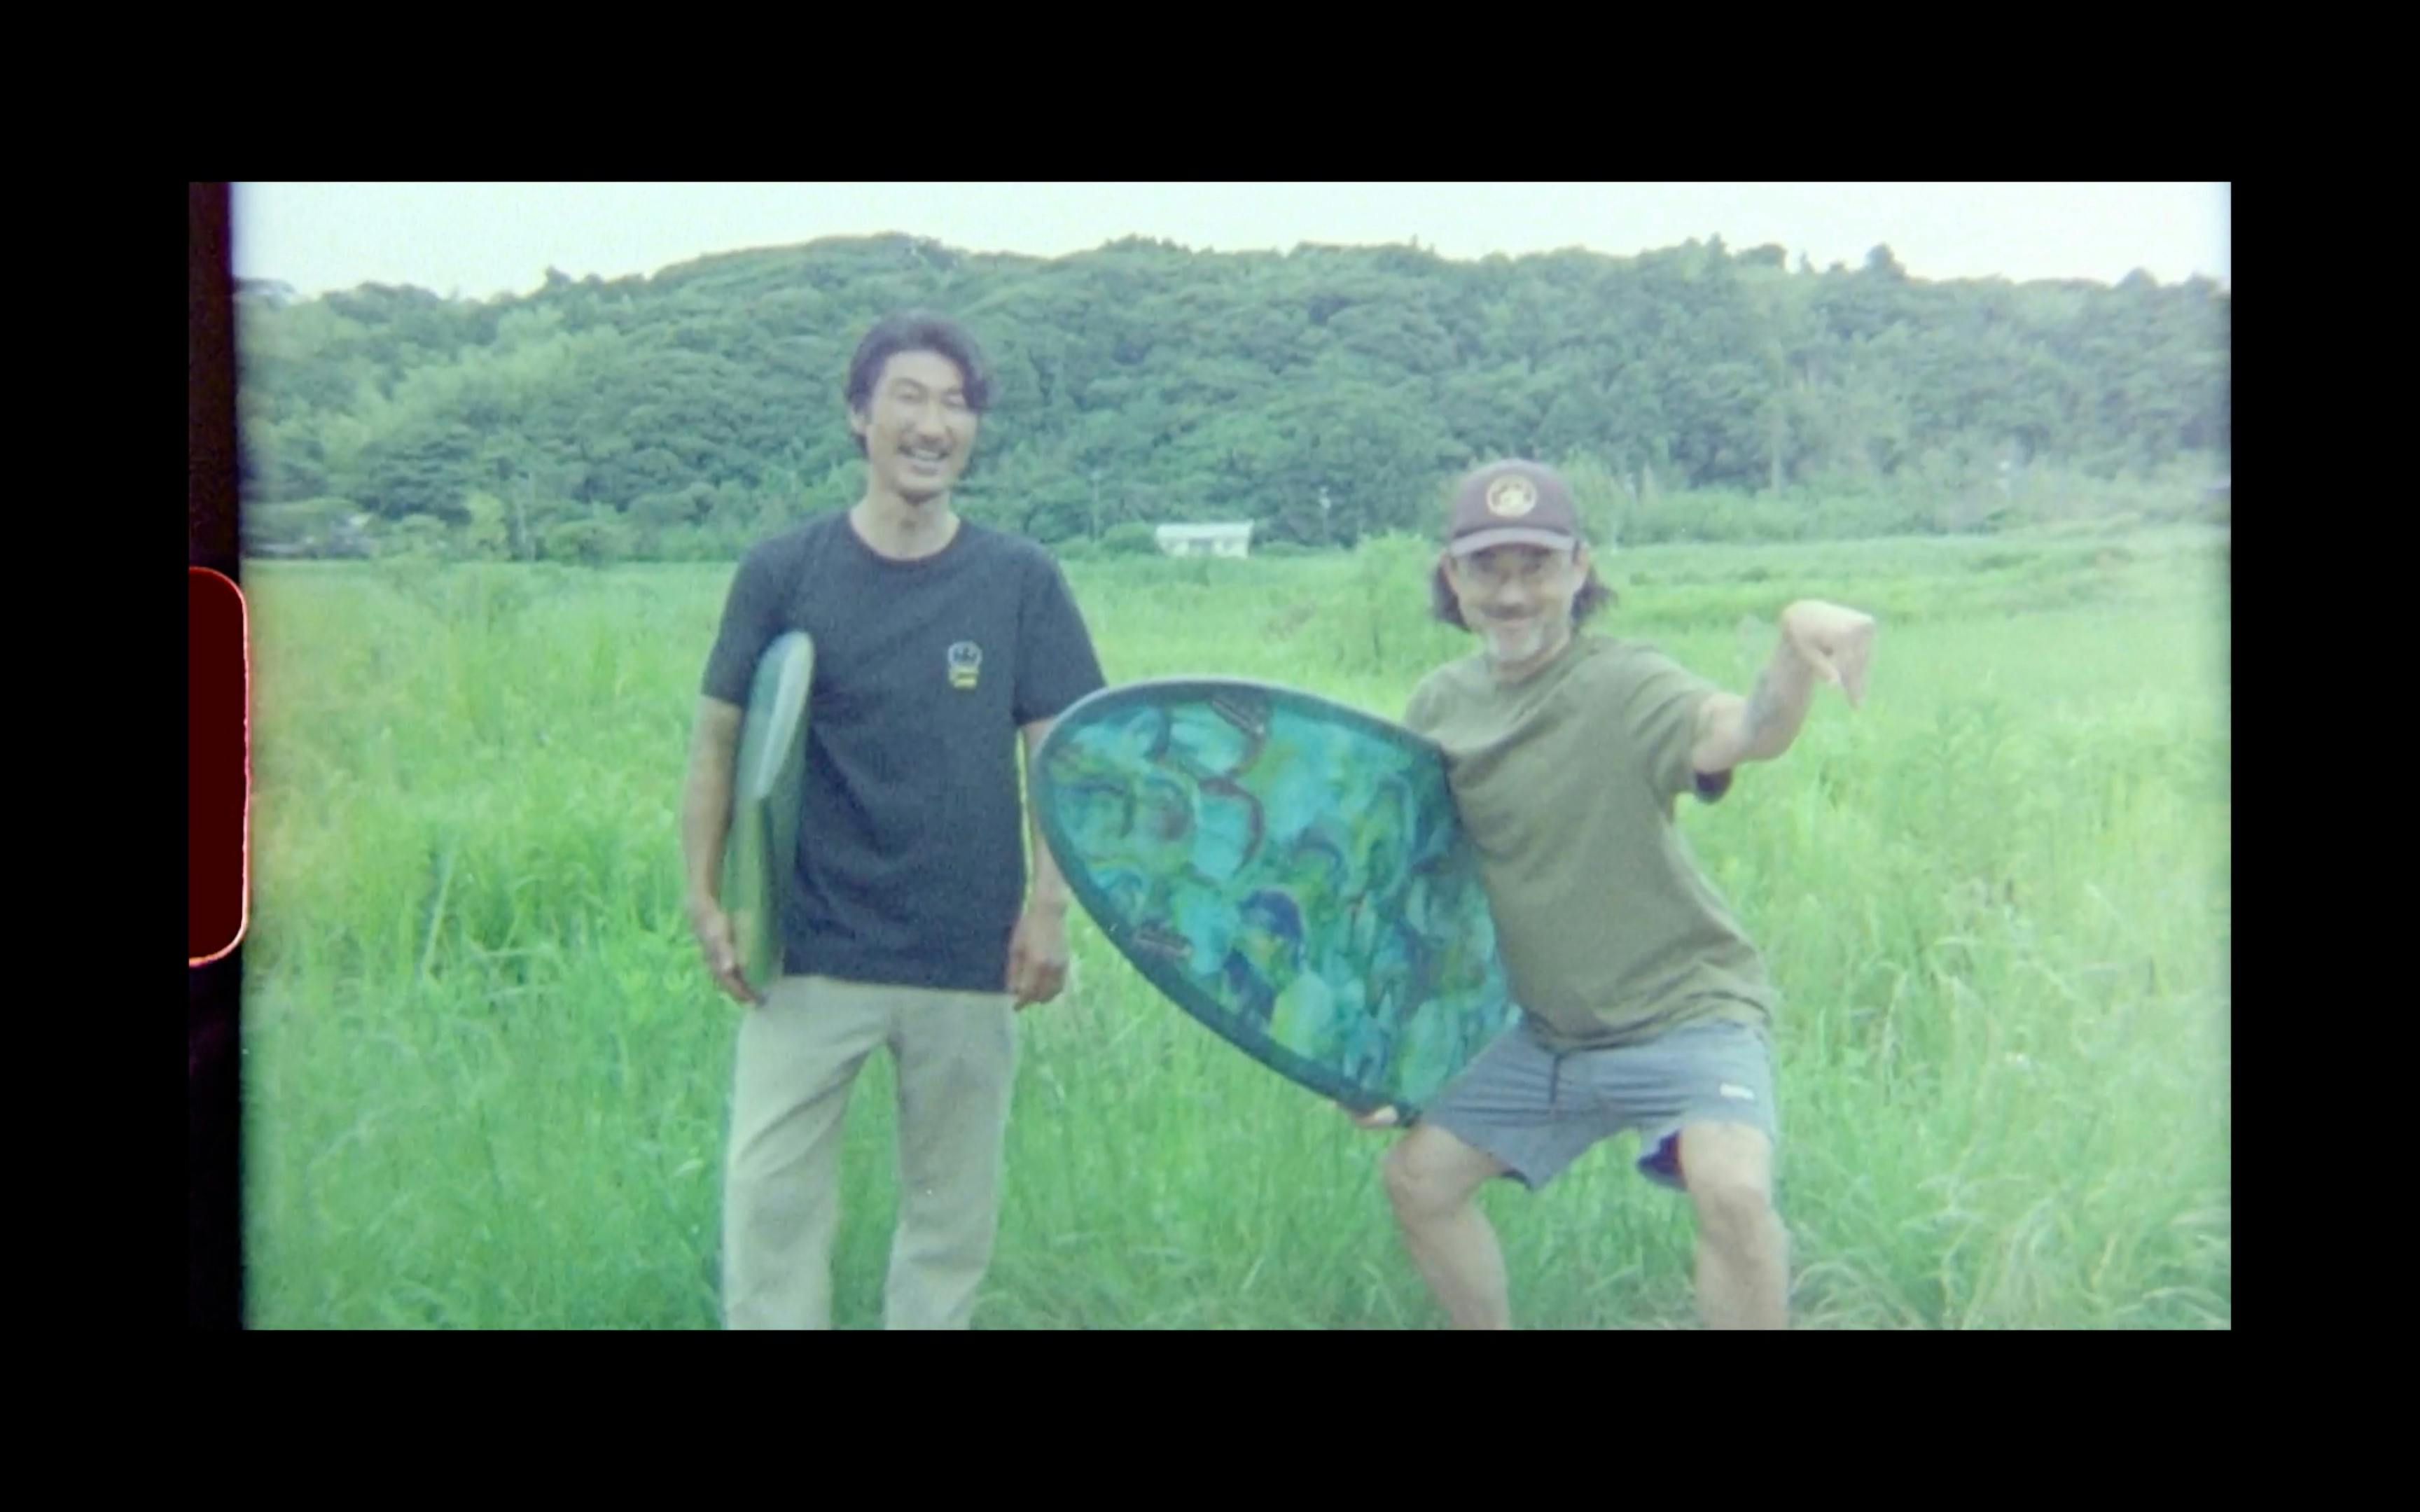 upcoming-studio-wasted-talent-oakley-surf-in-japan-craft.jpg